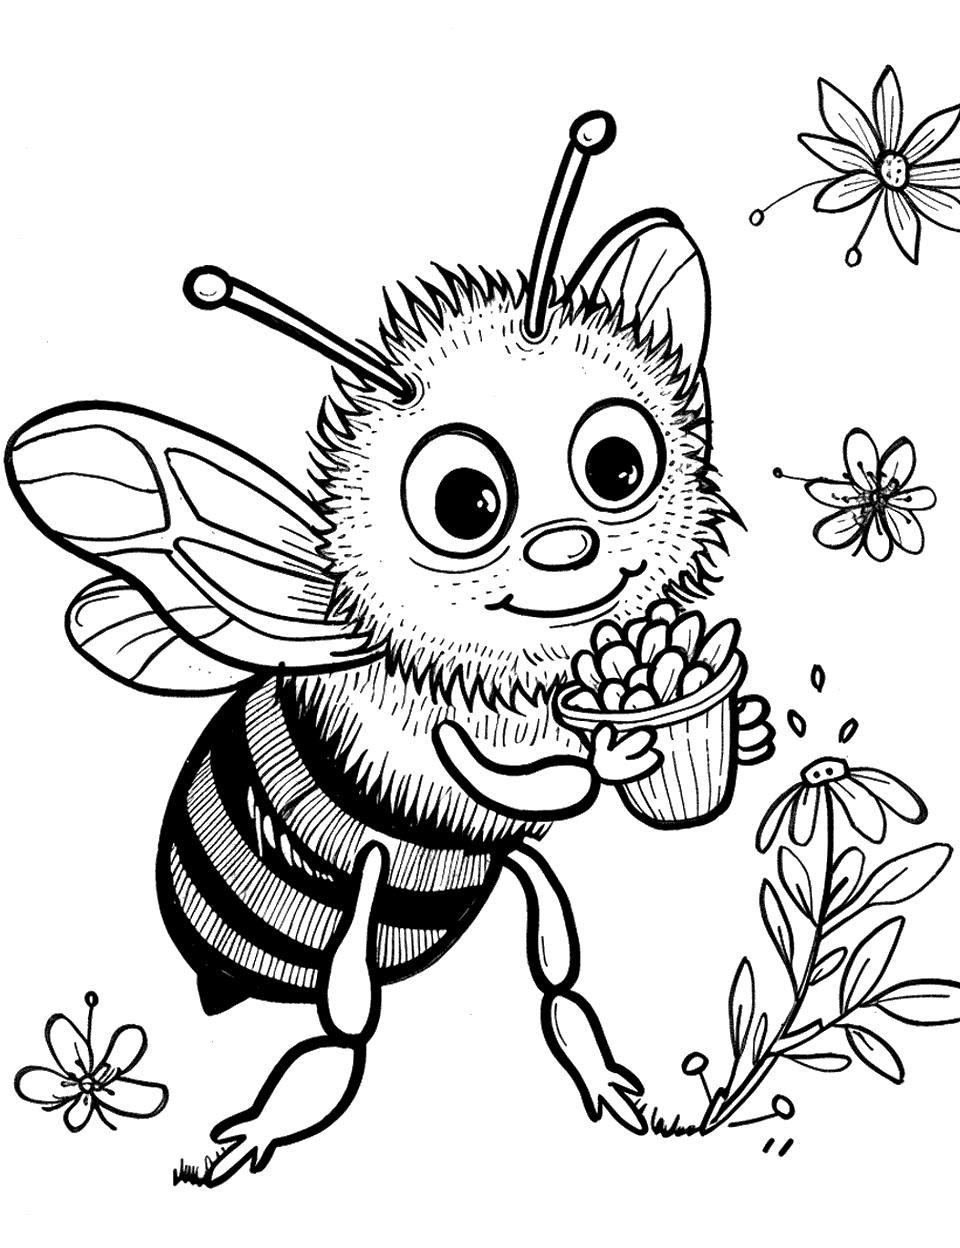 Happy Bee with Pollen Baskets Coloring Page - A joyful bee with its pollen baskets full, ready to head home.